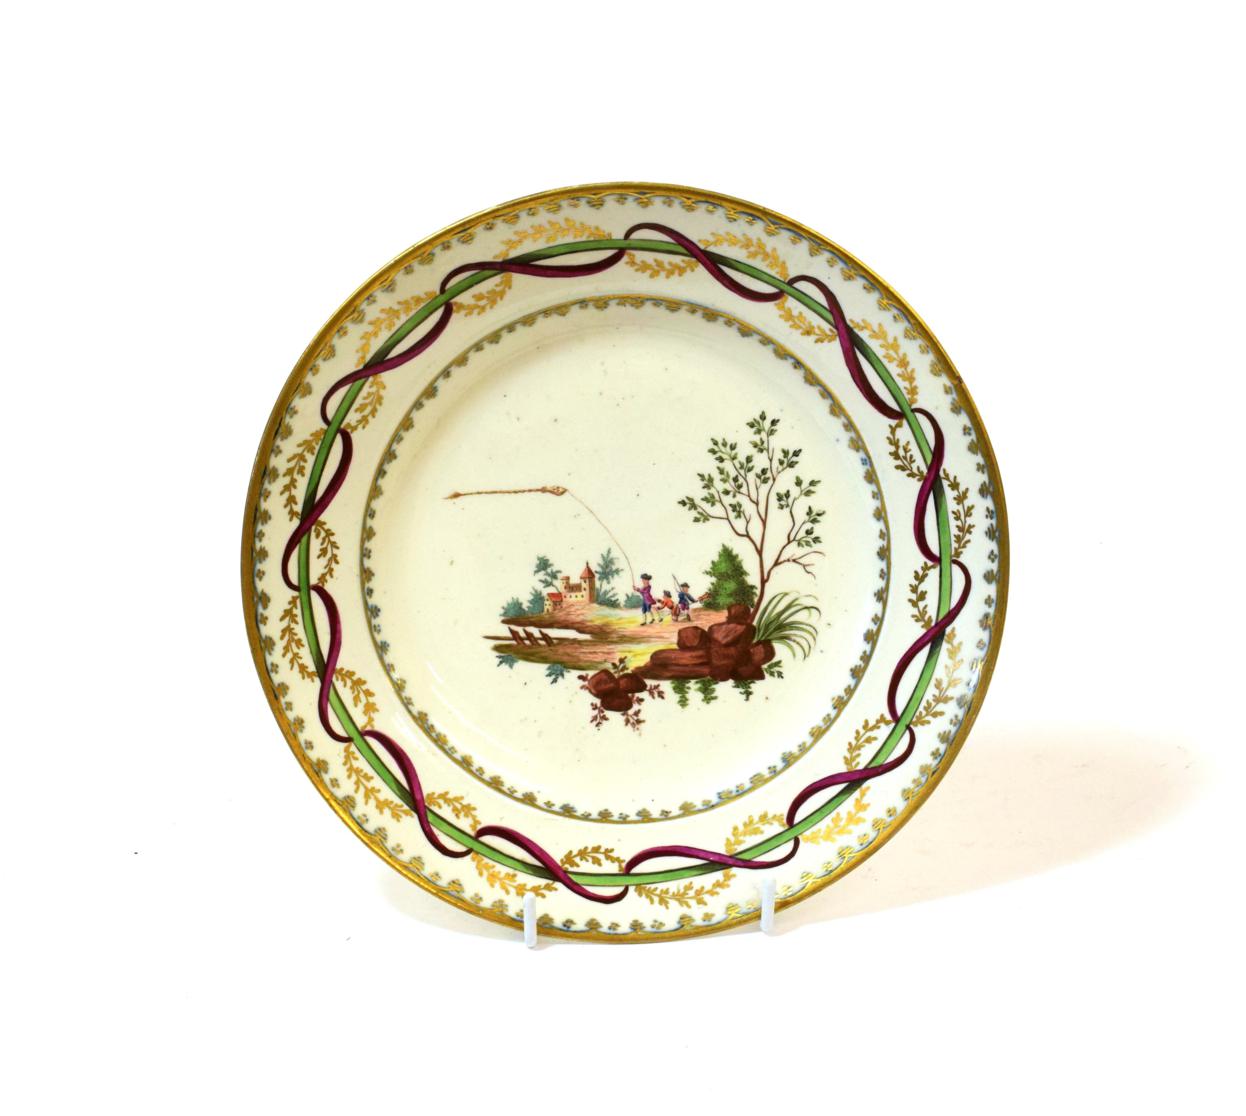 Lot 1078 - A Vienna Porcelain Soup Plate, circa 1800, painted with figures flying a kite in landscape within a